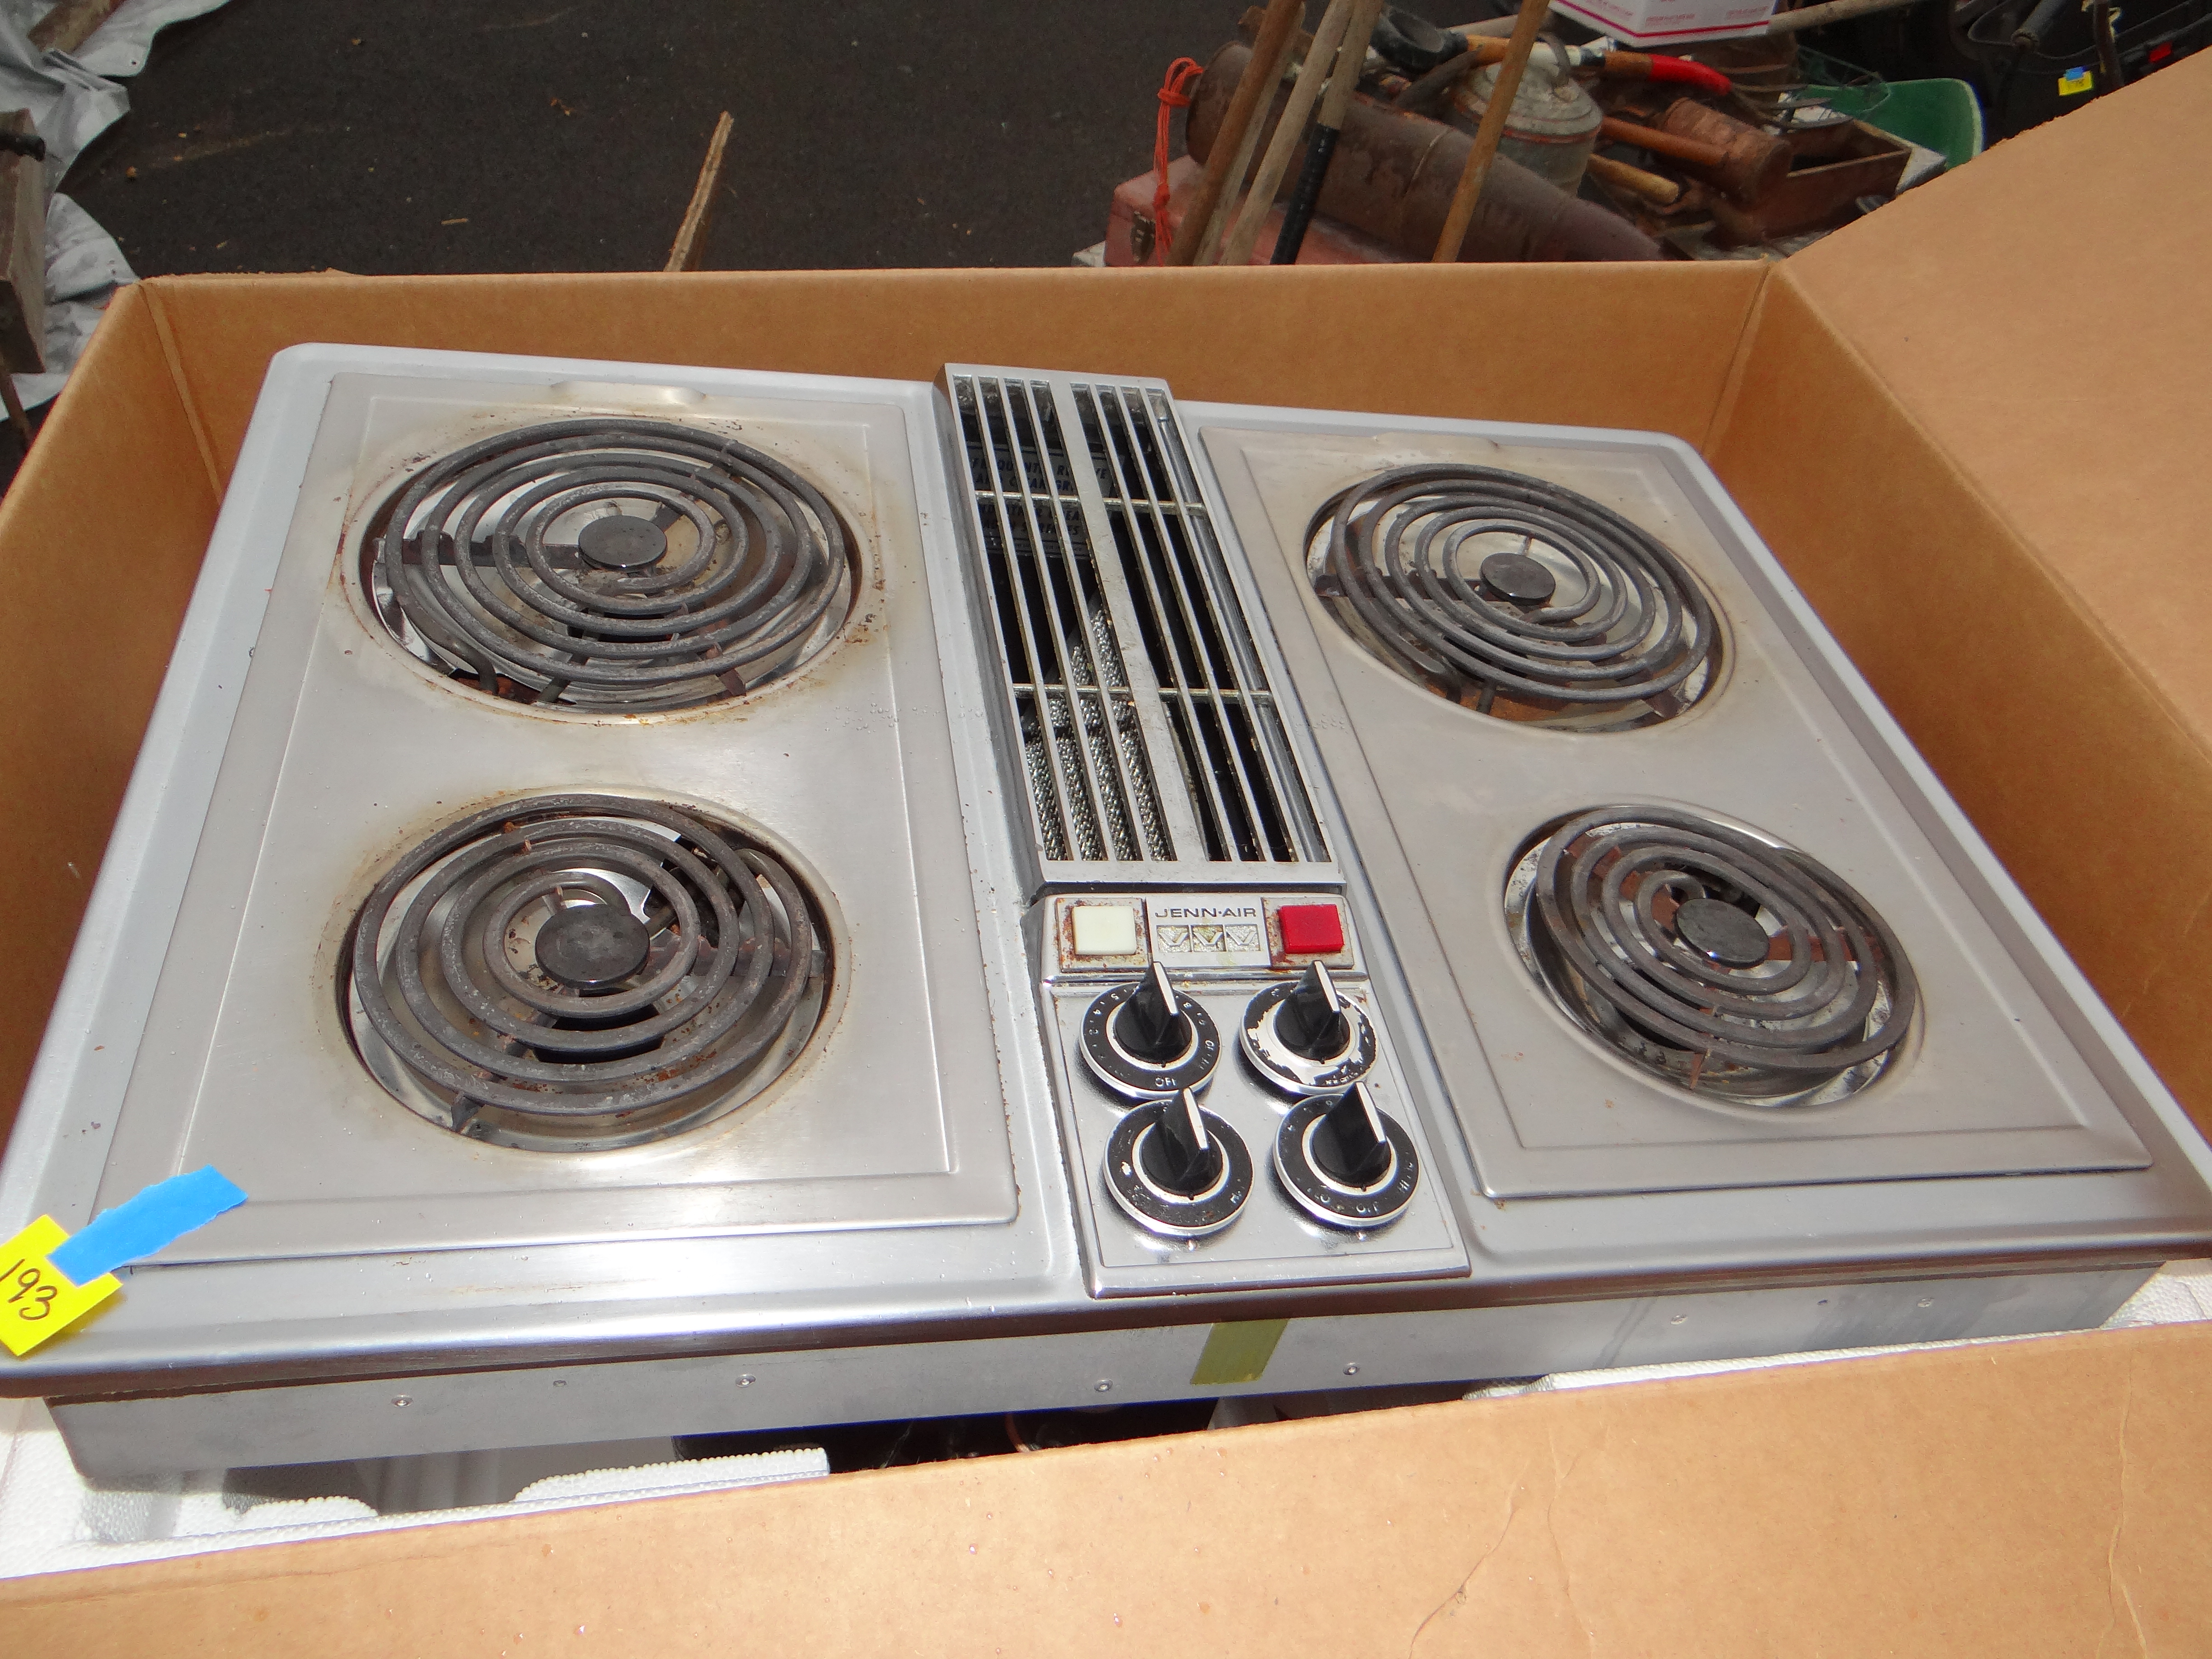 CC193-Jenn-Air Stove Top Used In Working Condition